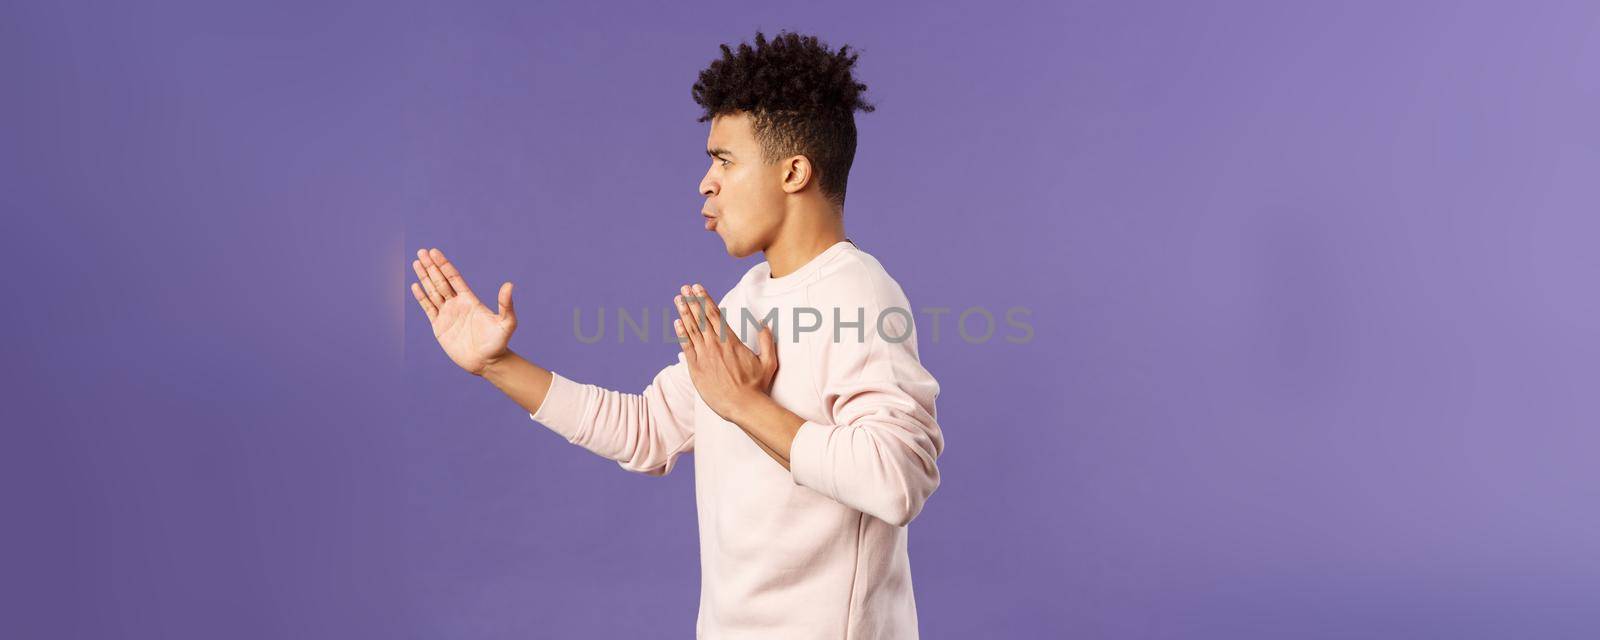 Profile portrait of young hispanic guy with dreads acting like he is ninja or martial arts fighter, practice his kung-fu or taekwondo skills, standing purple background. Copy space